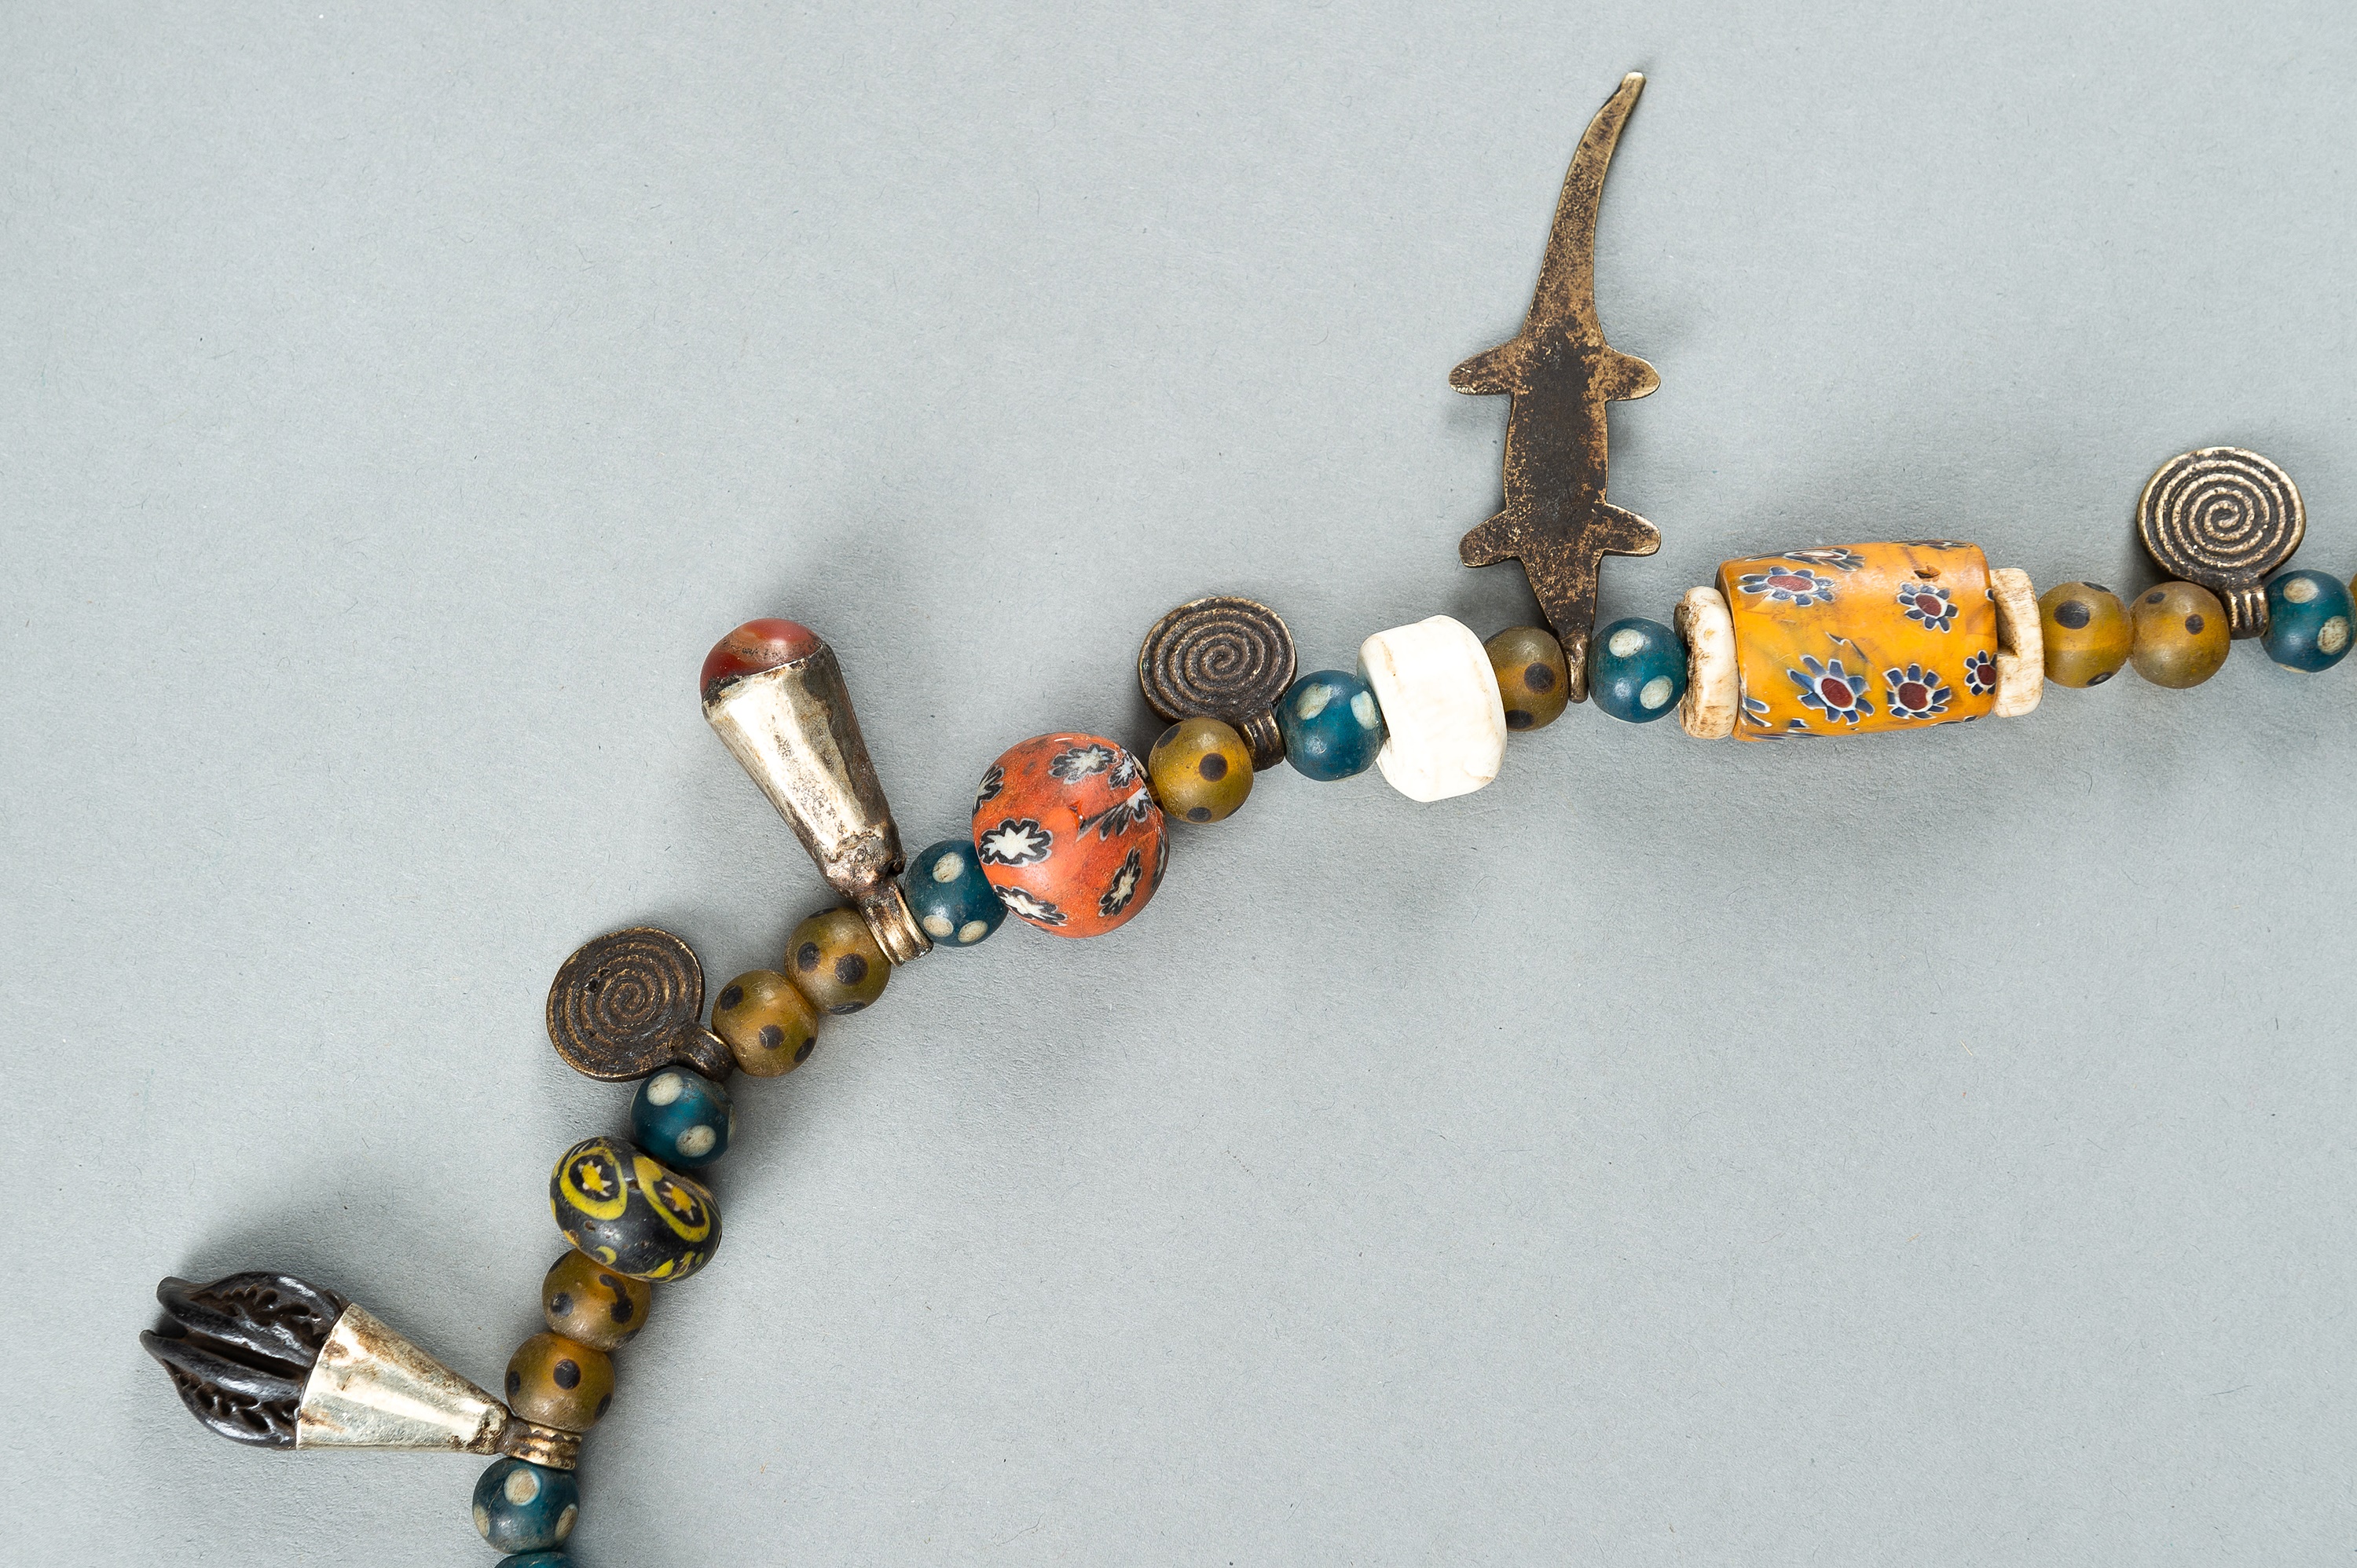 A NAGALAND MULTI-COLORED GLASS, BRASS AND SHELL NECKLACE, c. 1900s - Image 13 of 17